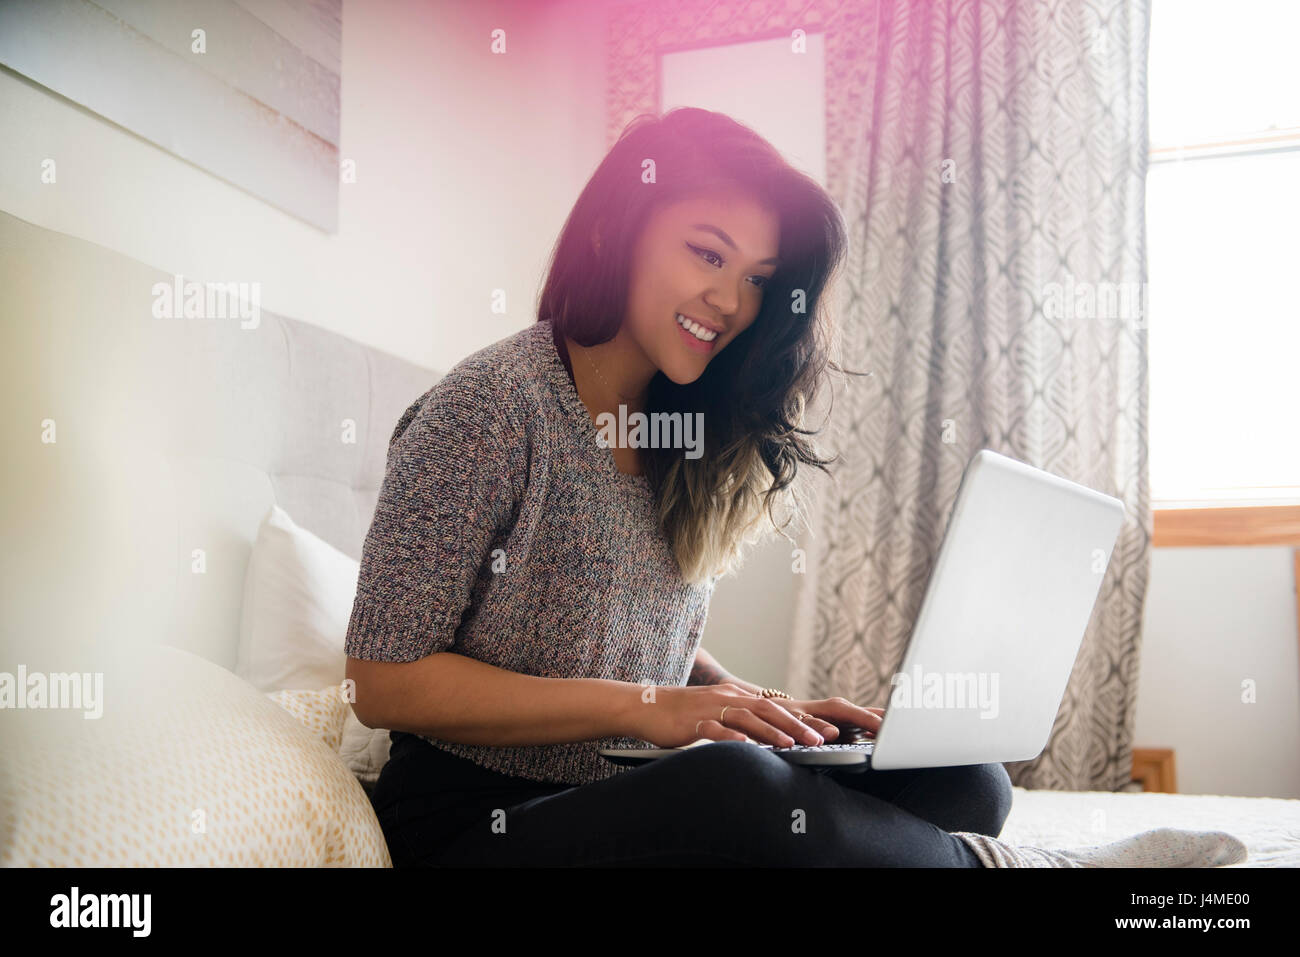 Mixed Race woman sitting on bed using laptop Stock Photo